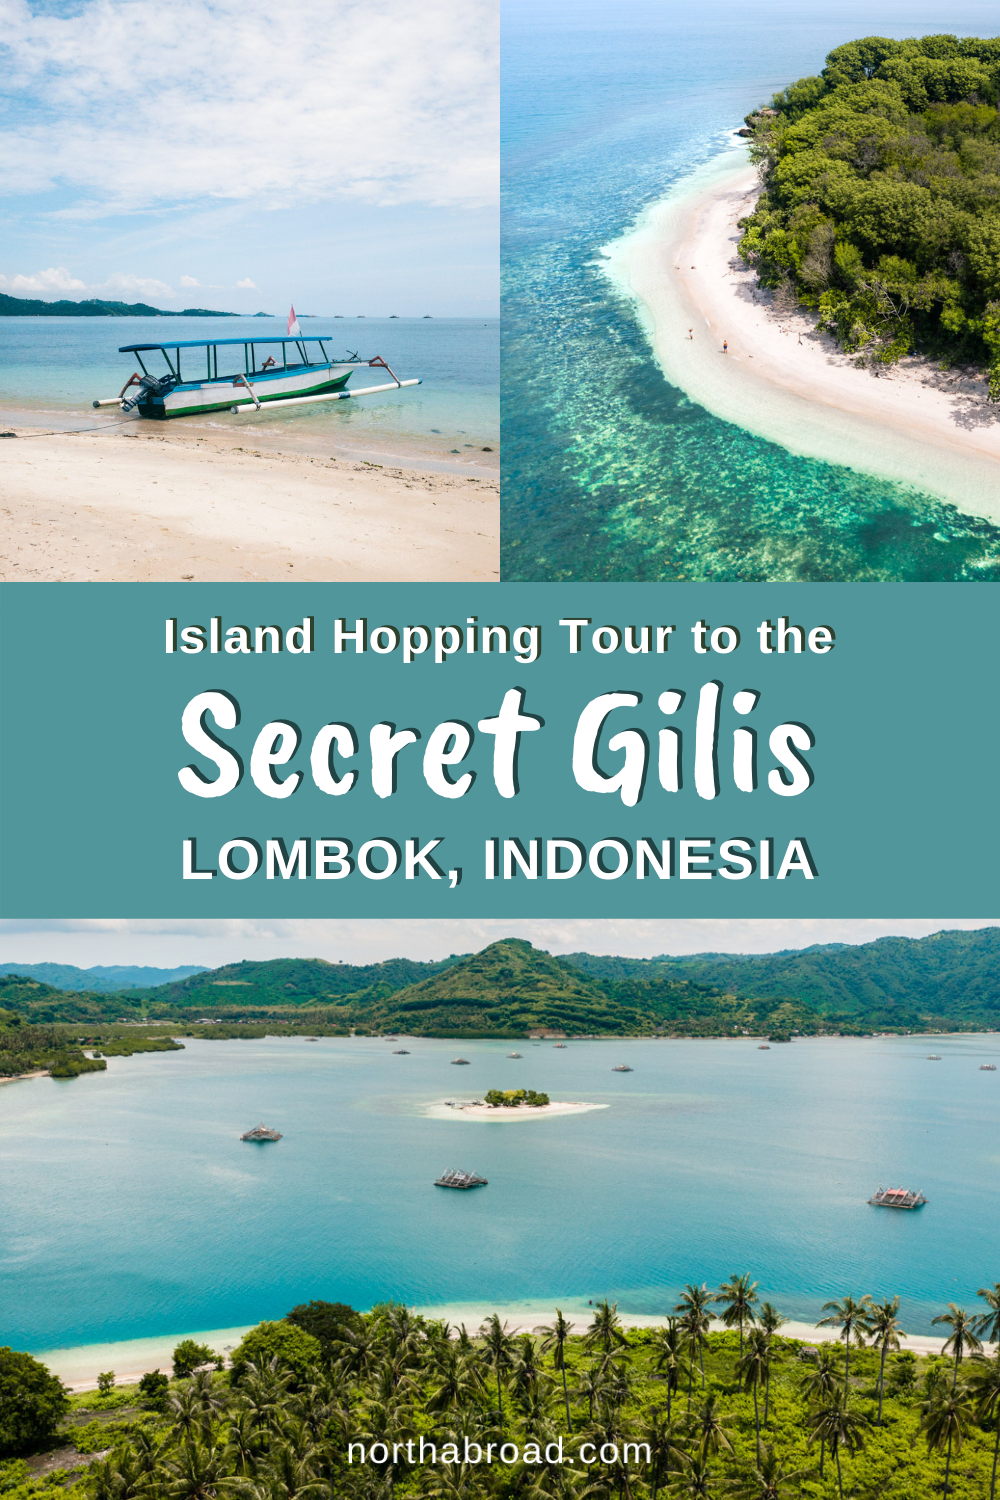 Travel Guide: Island Hopping Tour to the Secret Gilis from Lombok